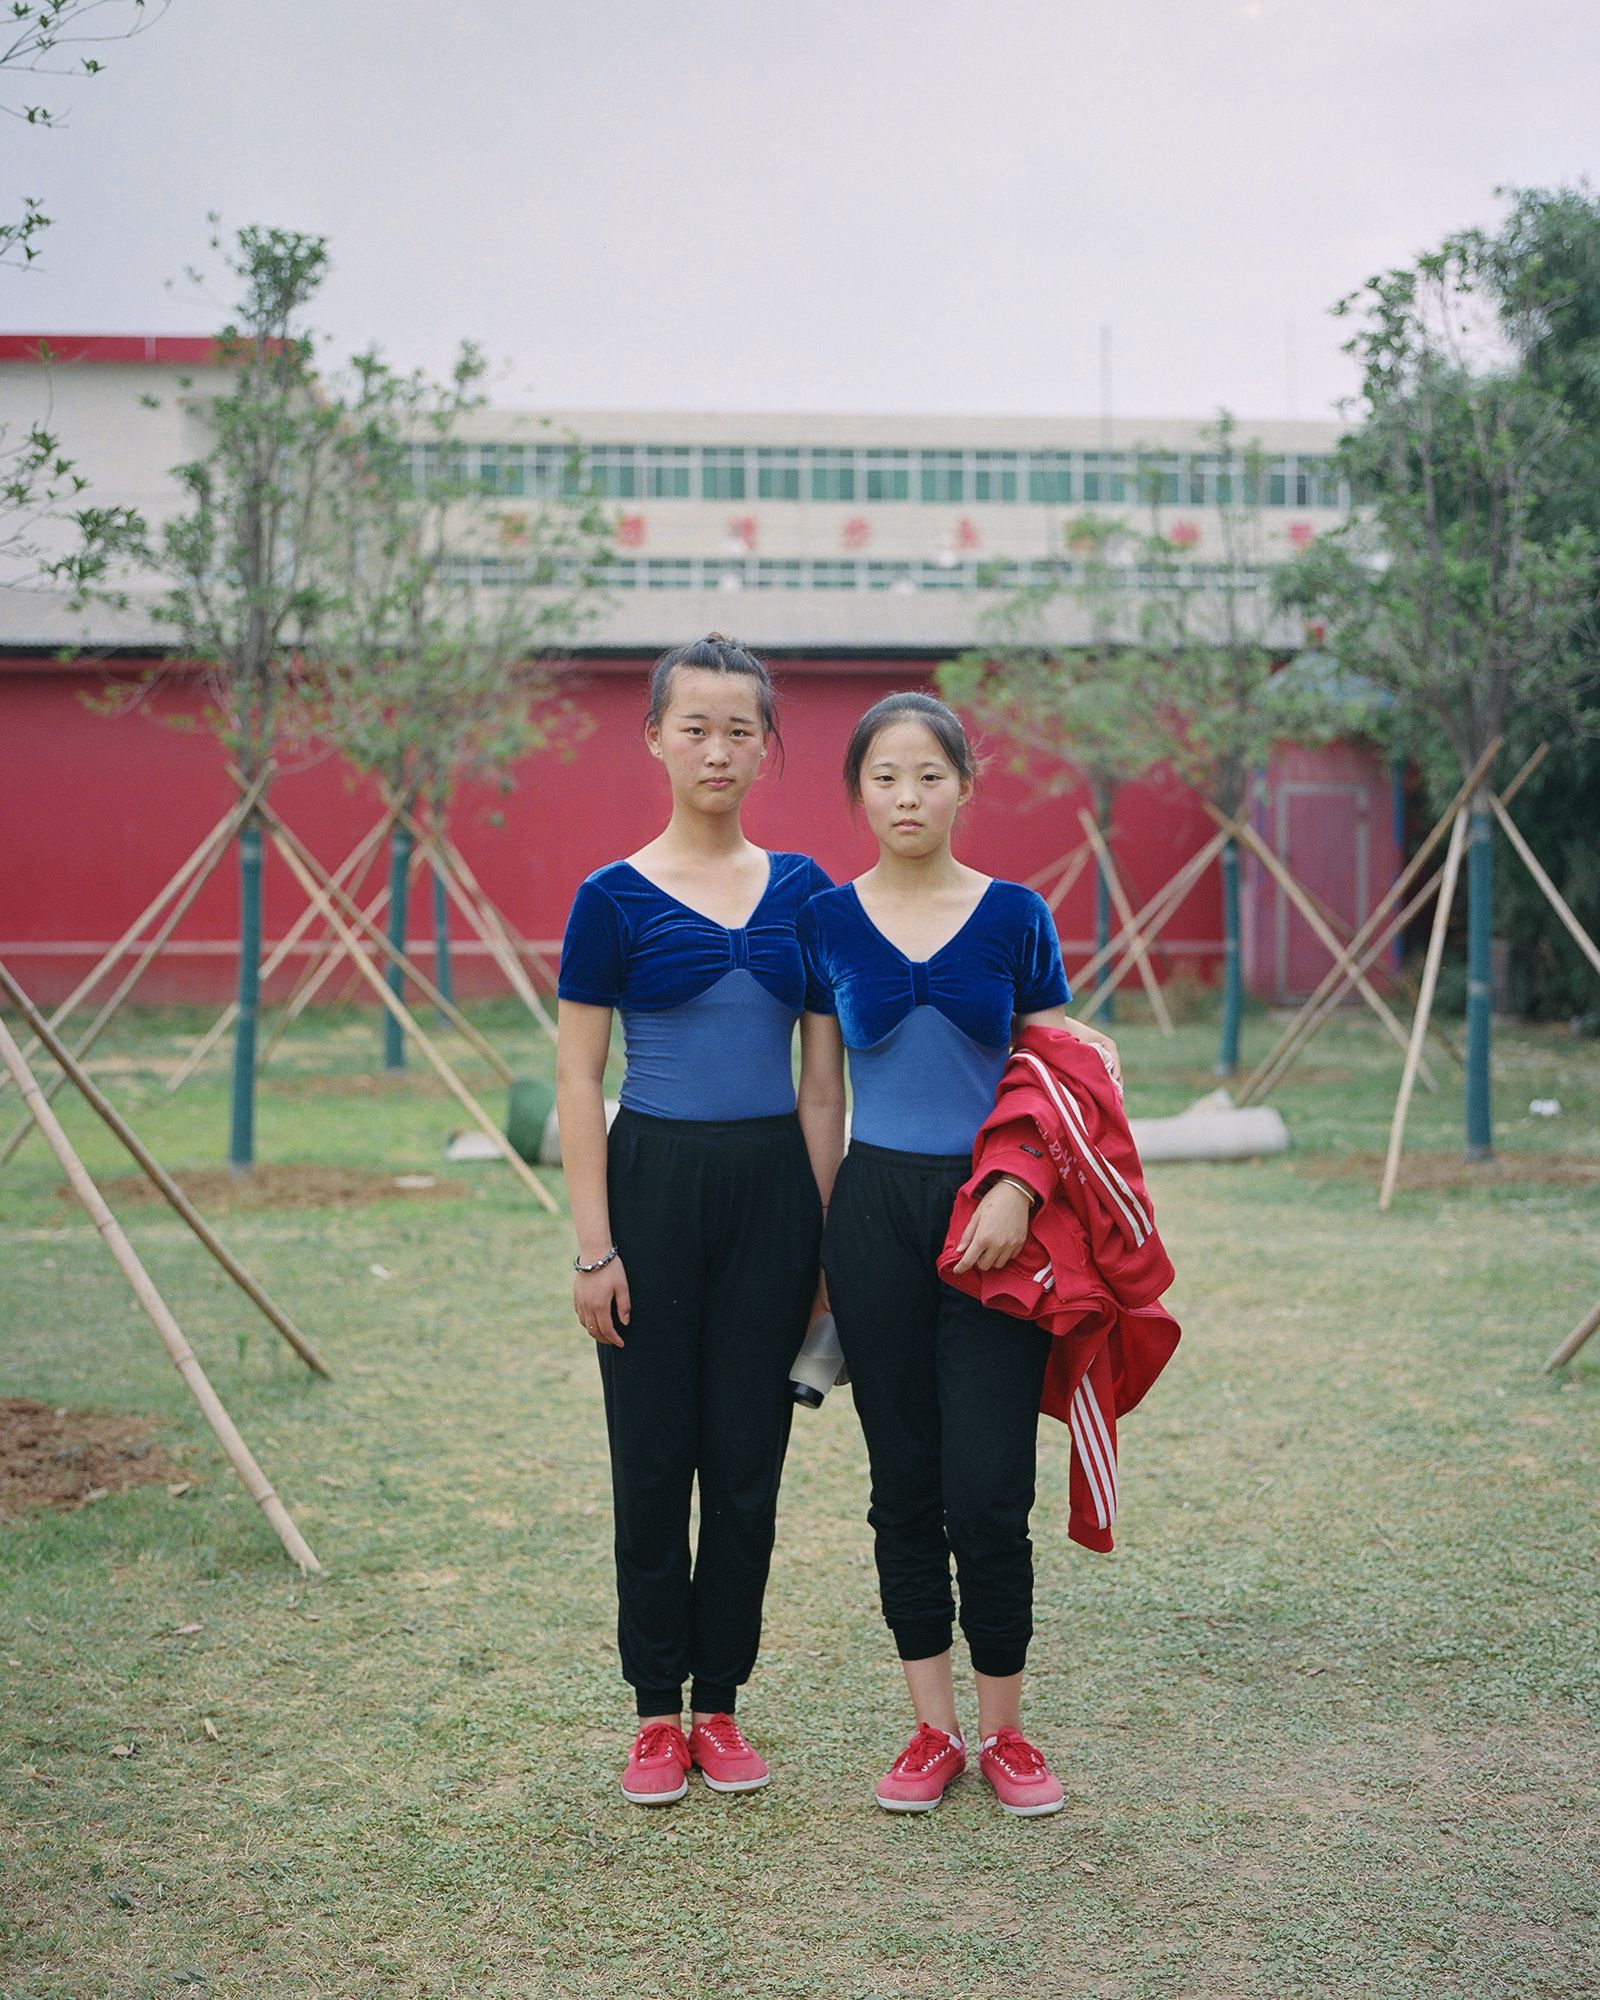 © Yangkun Shi - Image from the Retrotopia photography project